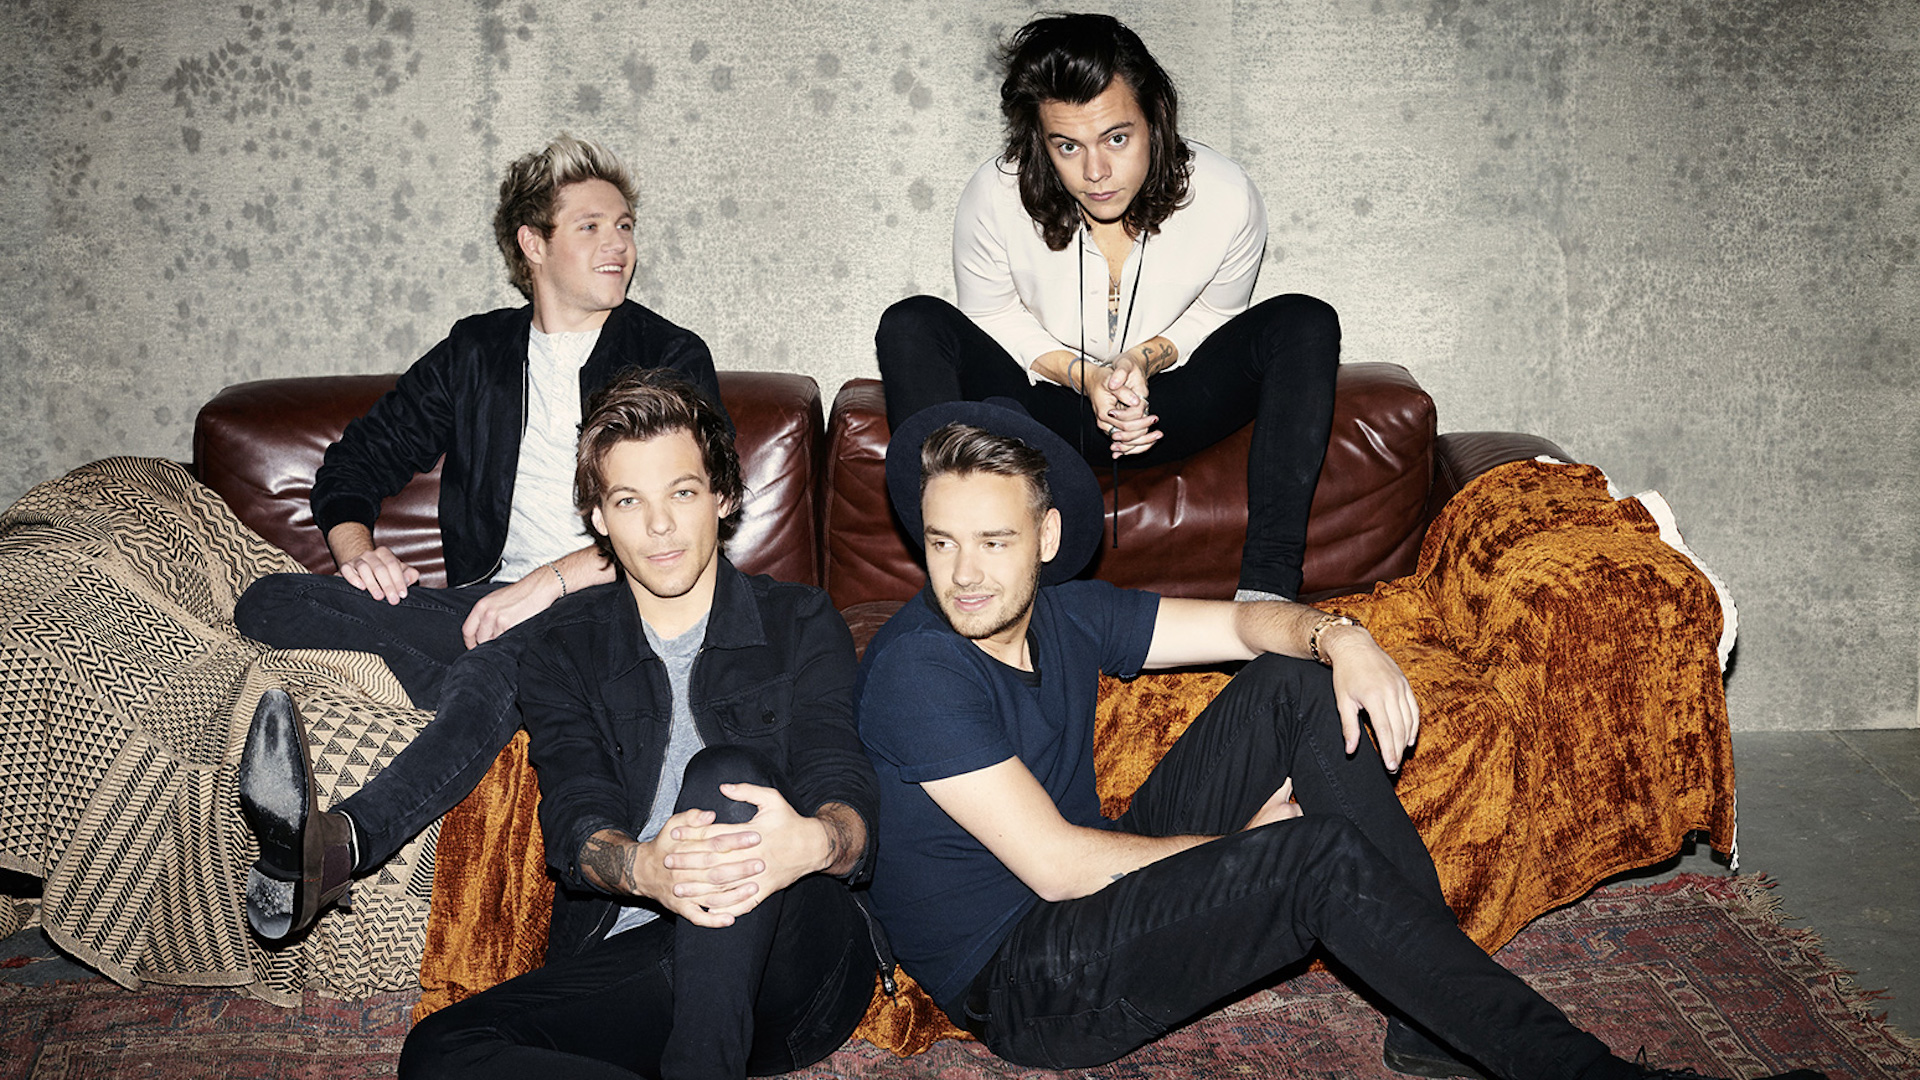 A photoshoot from One Direction's most recent album